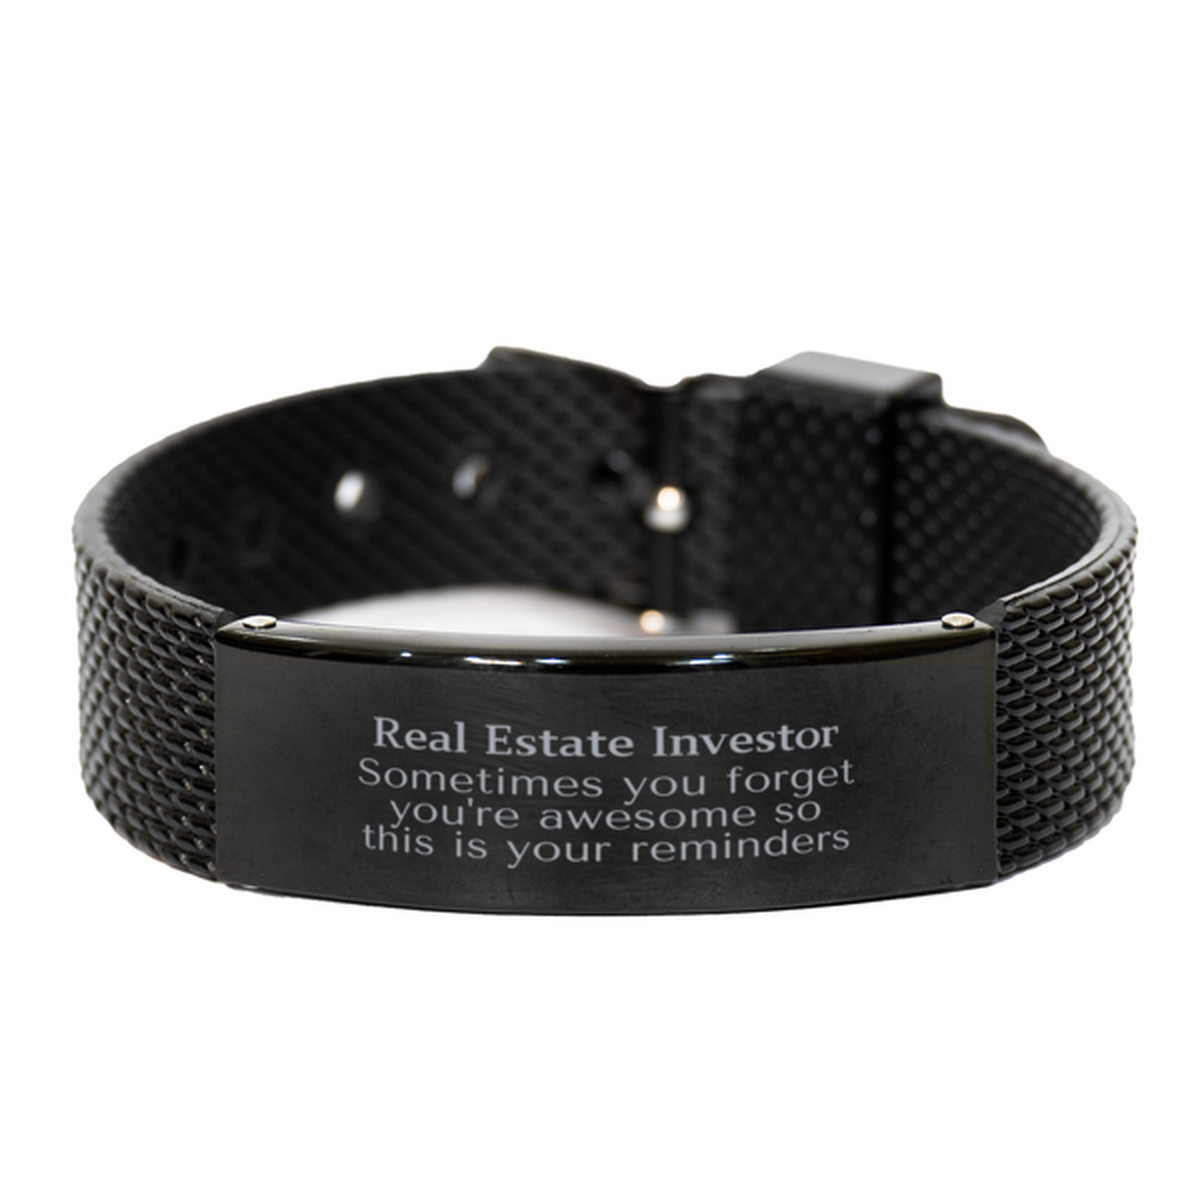 Sentimental Real Estate Investor Black Shark Mesh Bracelet, Real Estate Investor Sometimes you forget you're awesome so this is your reminders, Graduation Christmas Birthday Gifts for Real Estate Investor, Men, Women, Coworkers